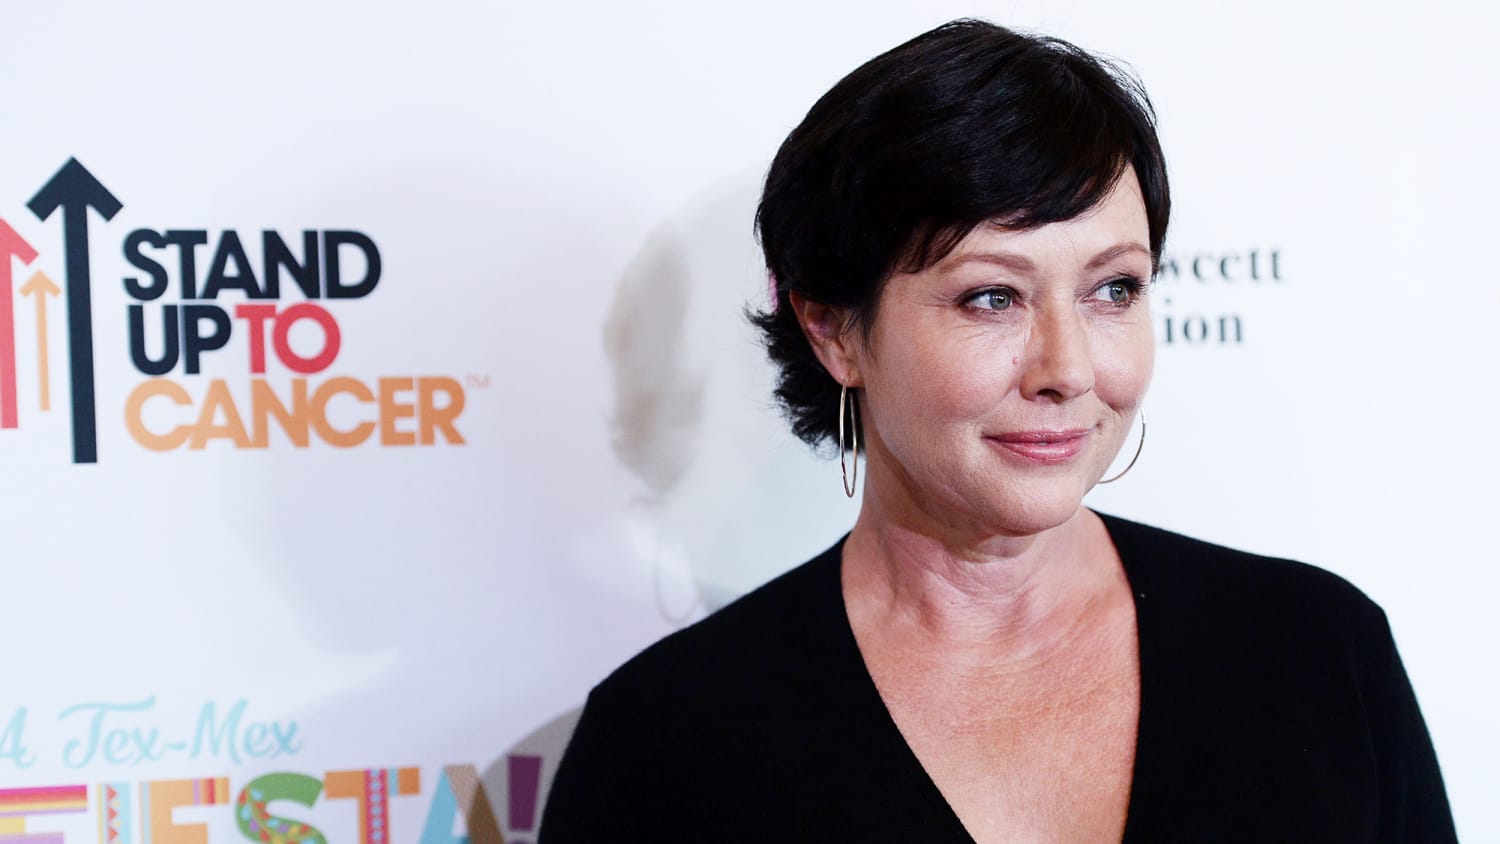 Shannen Doherty shares powerful photo for Breast Cancer Awareness Month - TODAY.com